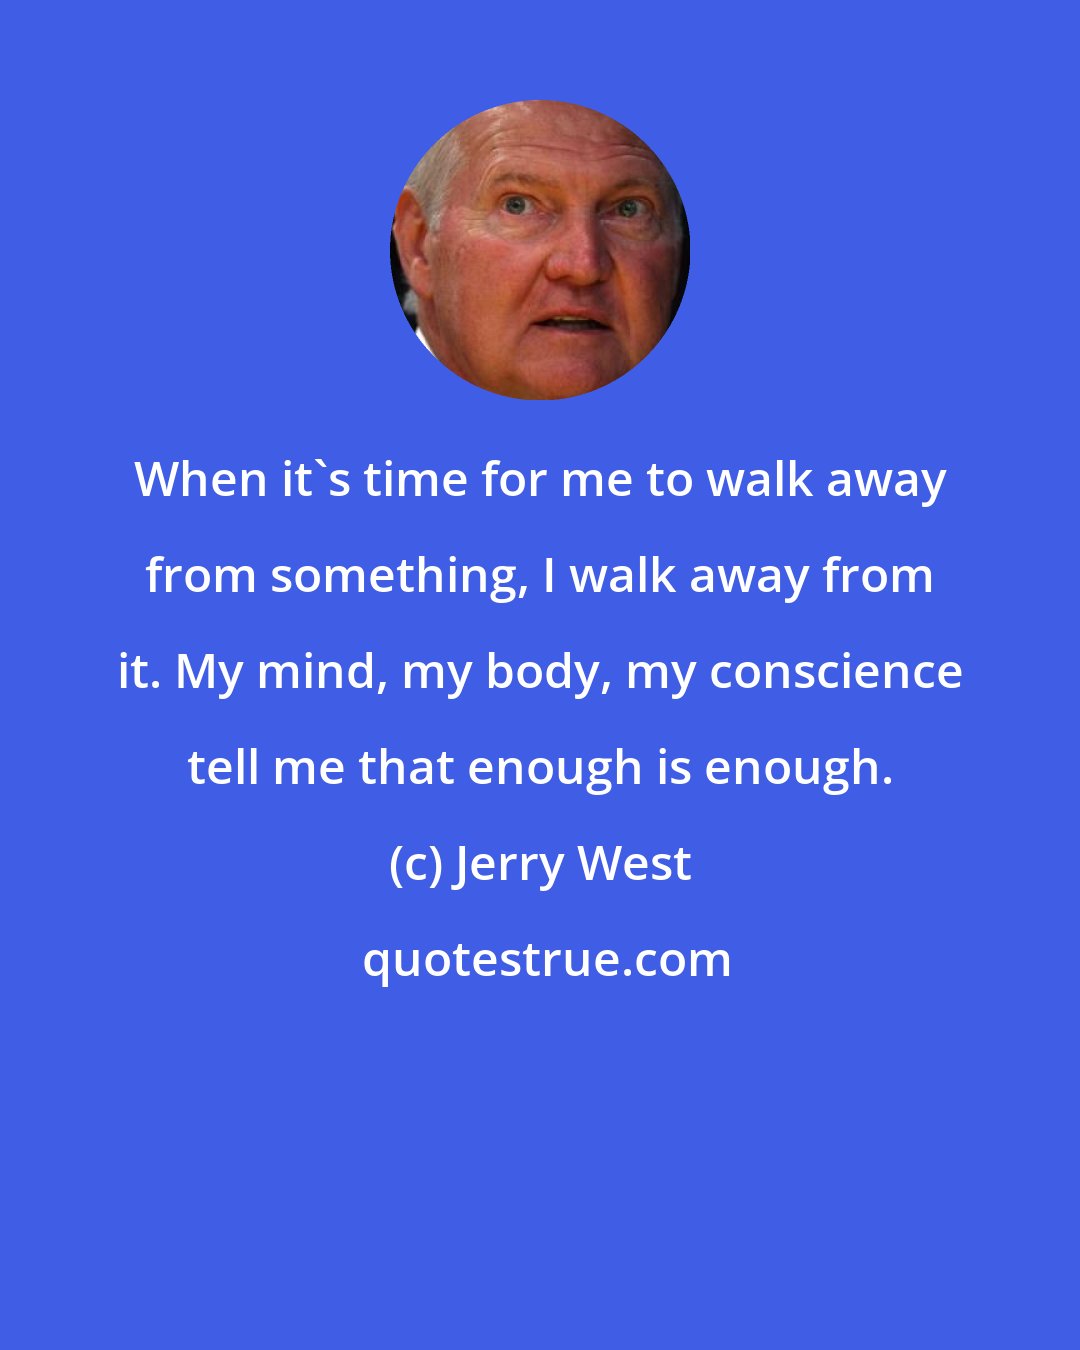 Jerry West: When it's time for me to walk away from something, I walk away from it. My mind, my body, my conscience tell me that enough is enough.